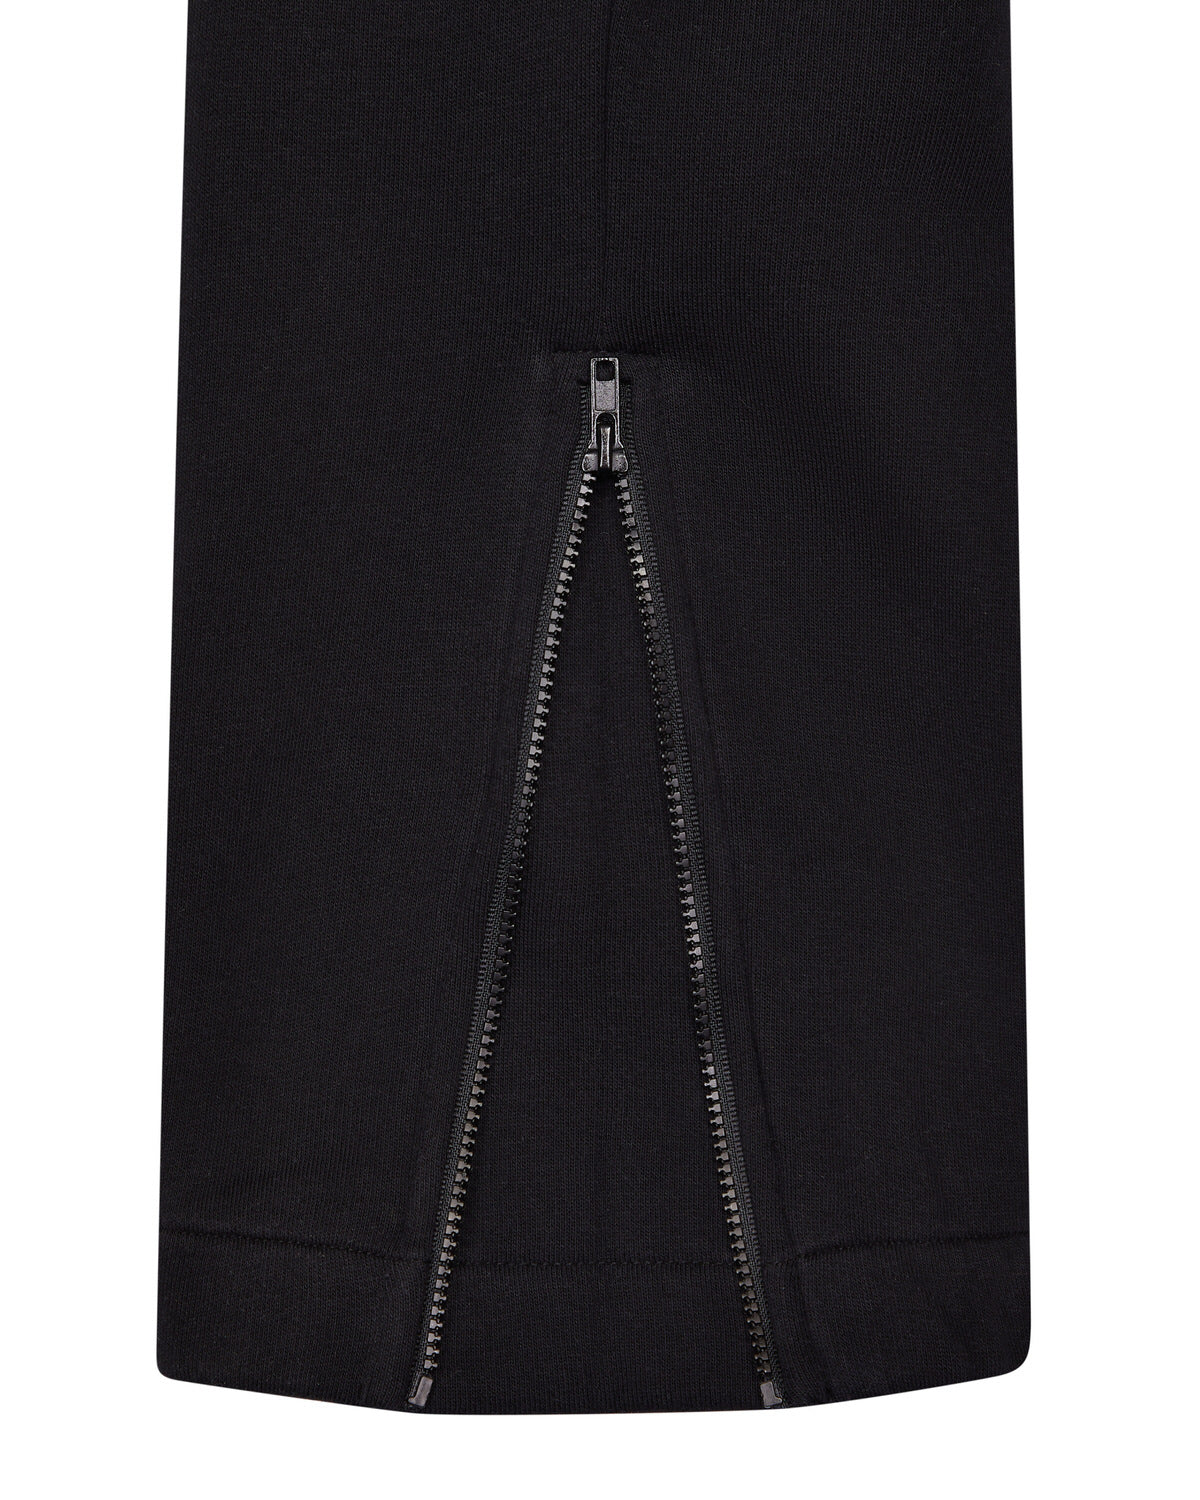 Chenille Decoded Jogger - Blackout